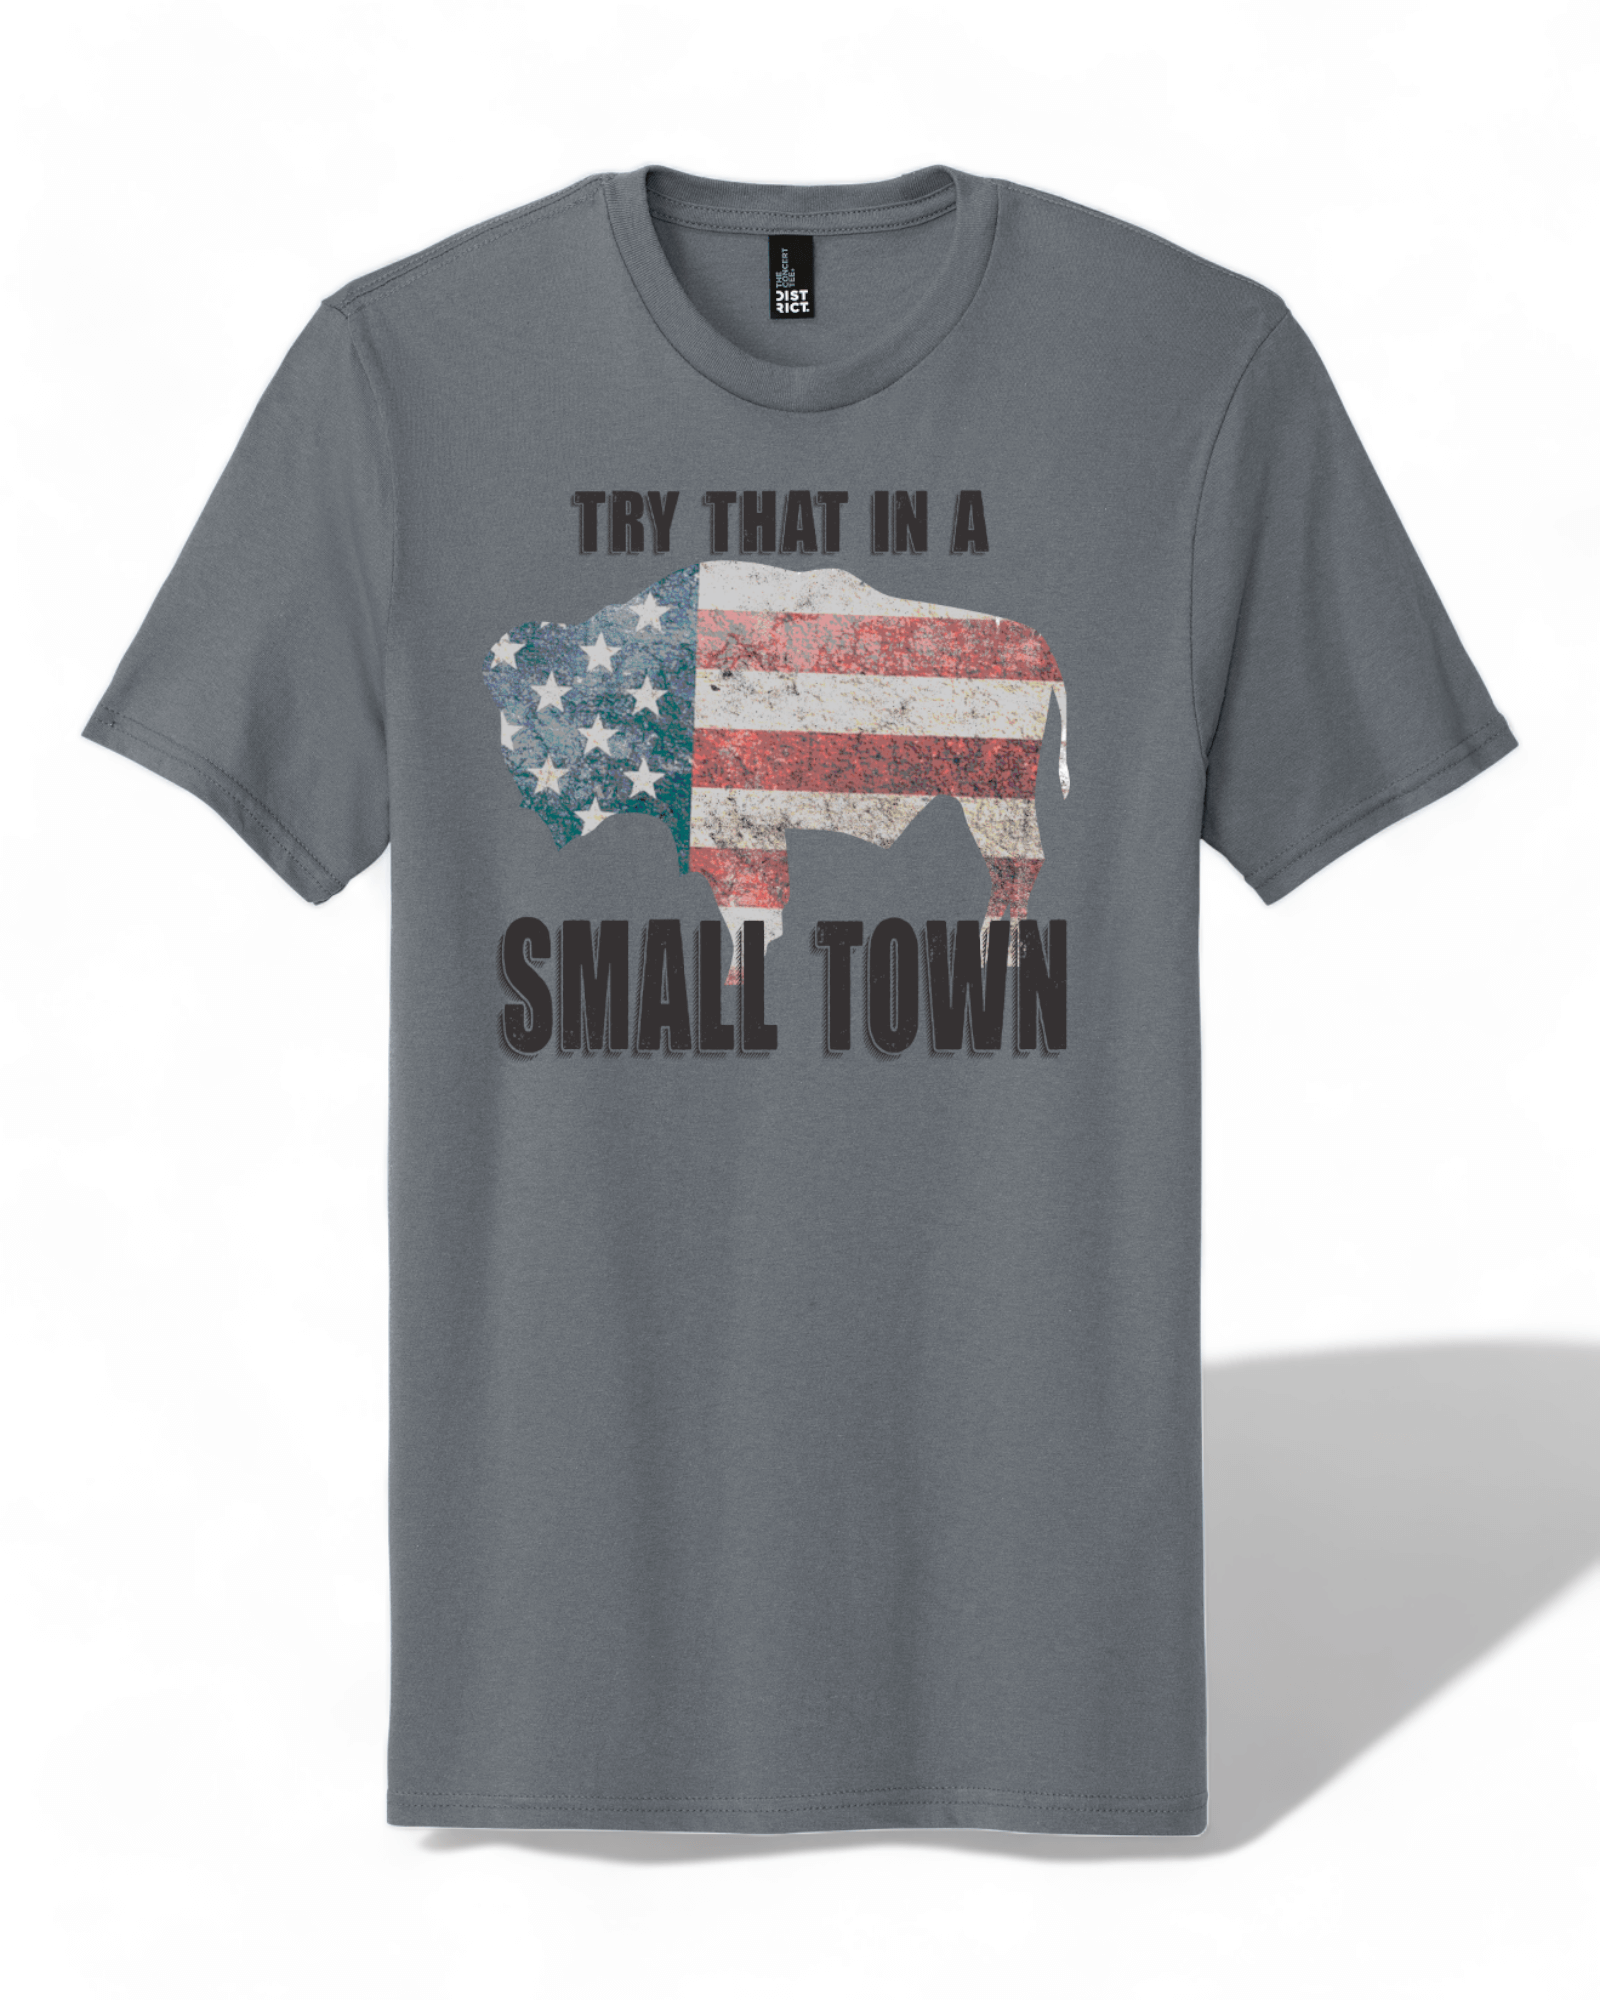 Try That in a Small Town Shirt